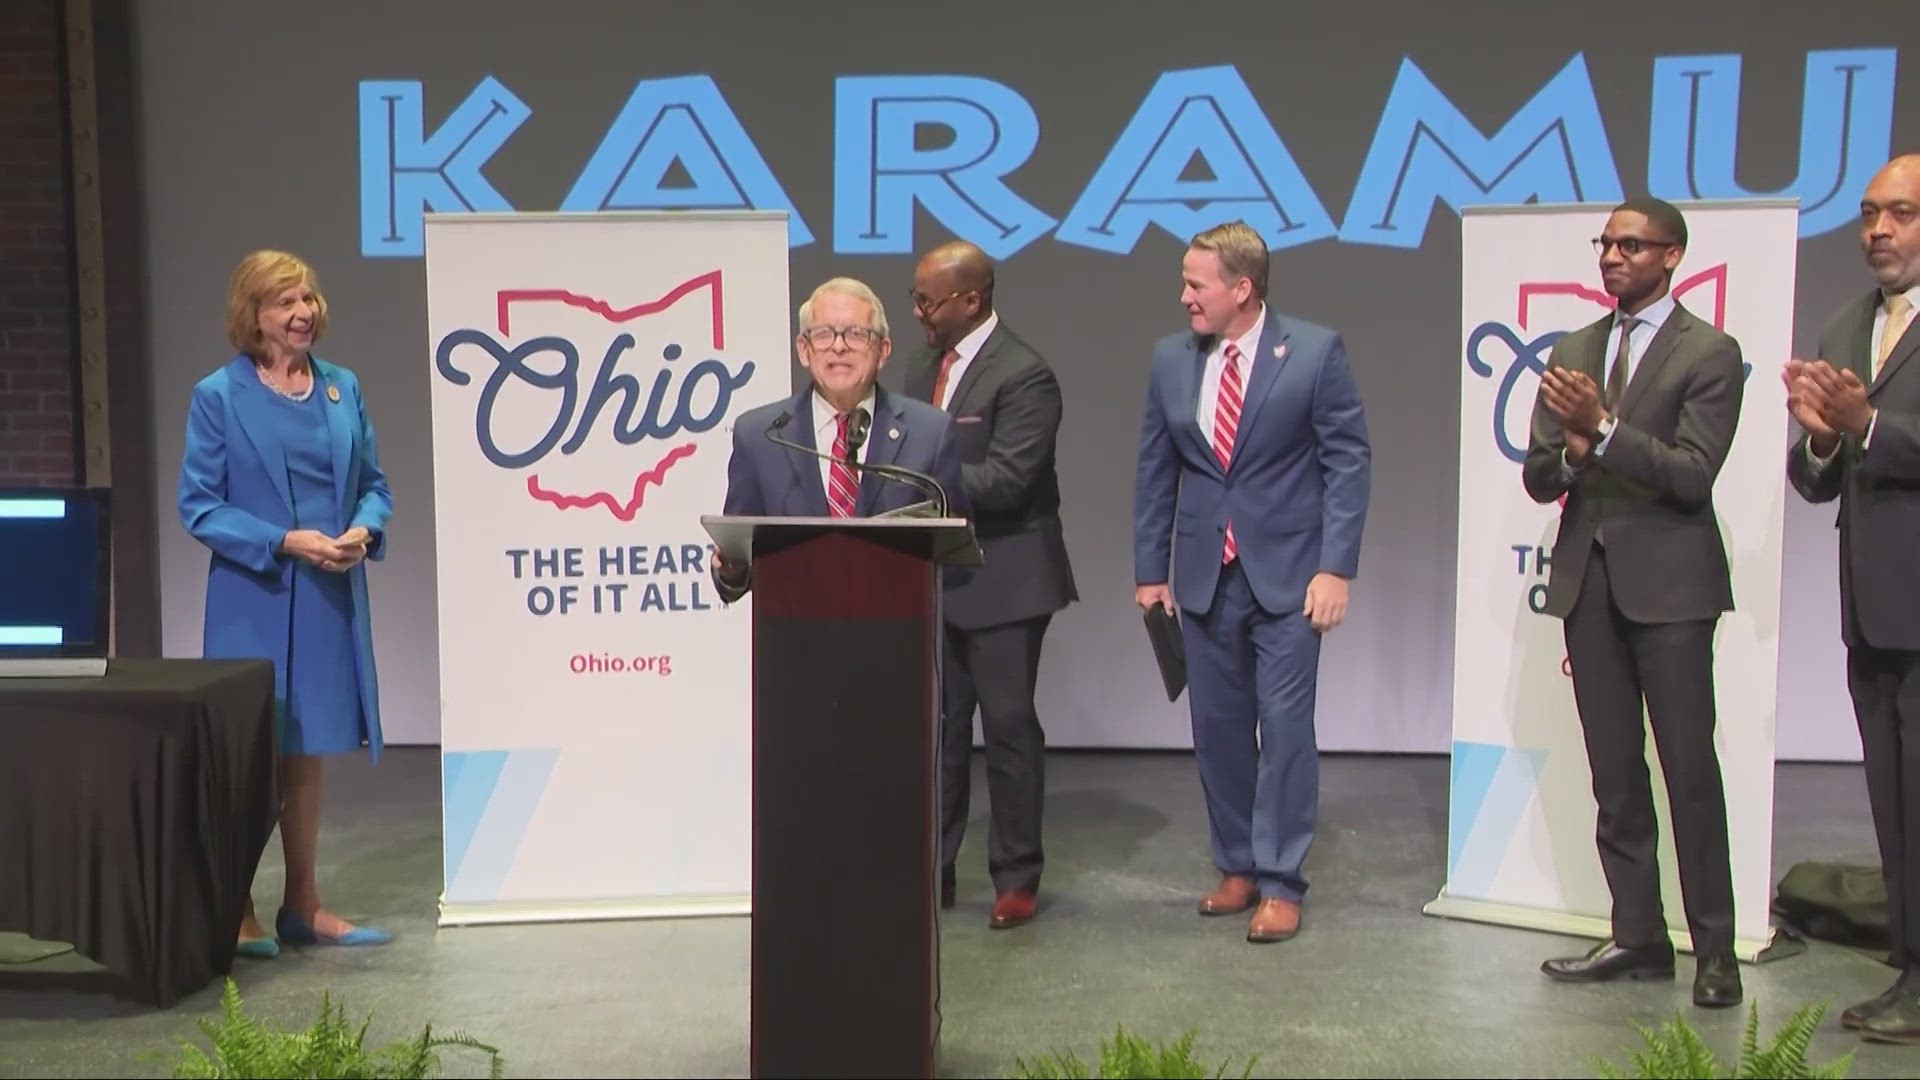 Gov. DeWine announced that the state is returning to "Ohio, The Heart of it All," as the state's tourism slogan.